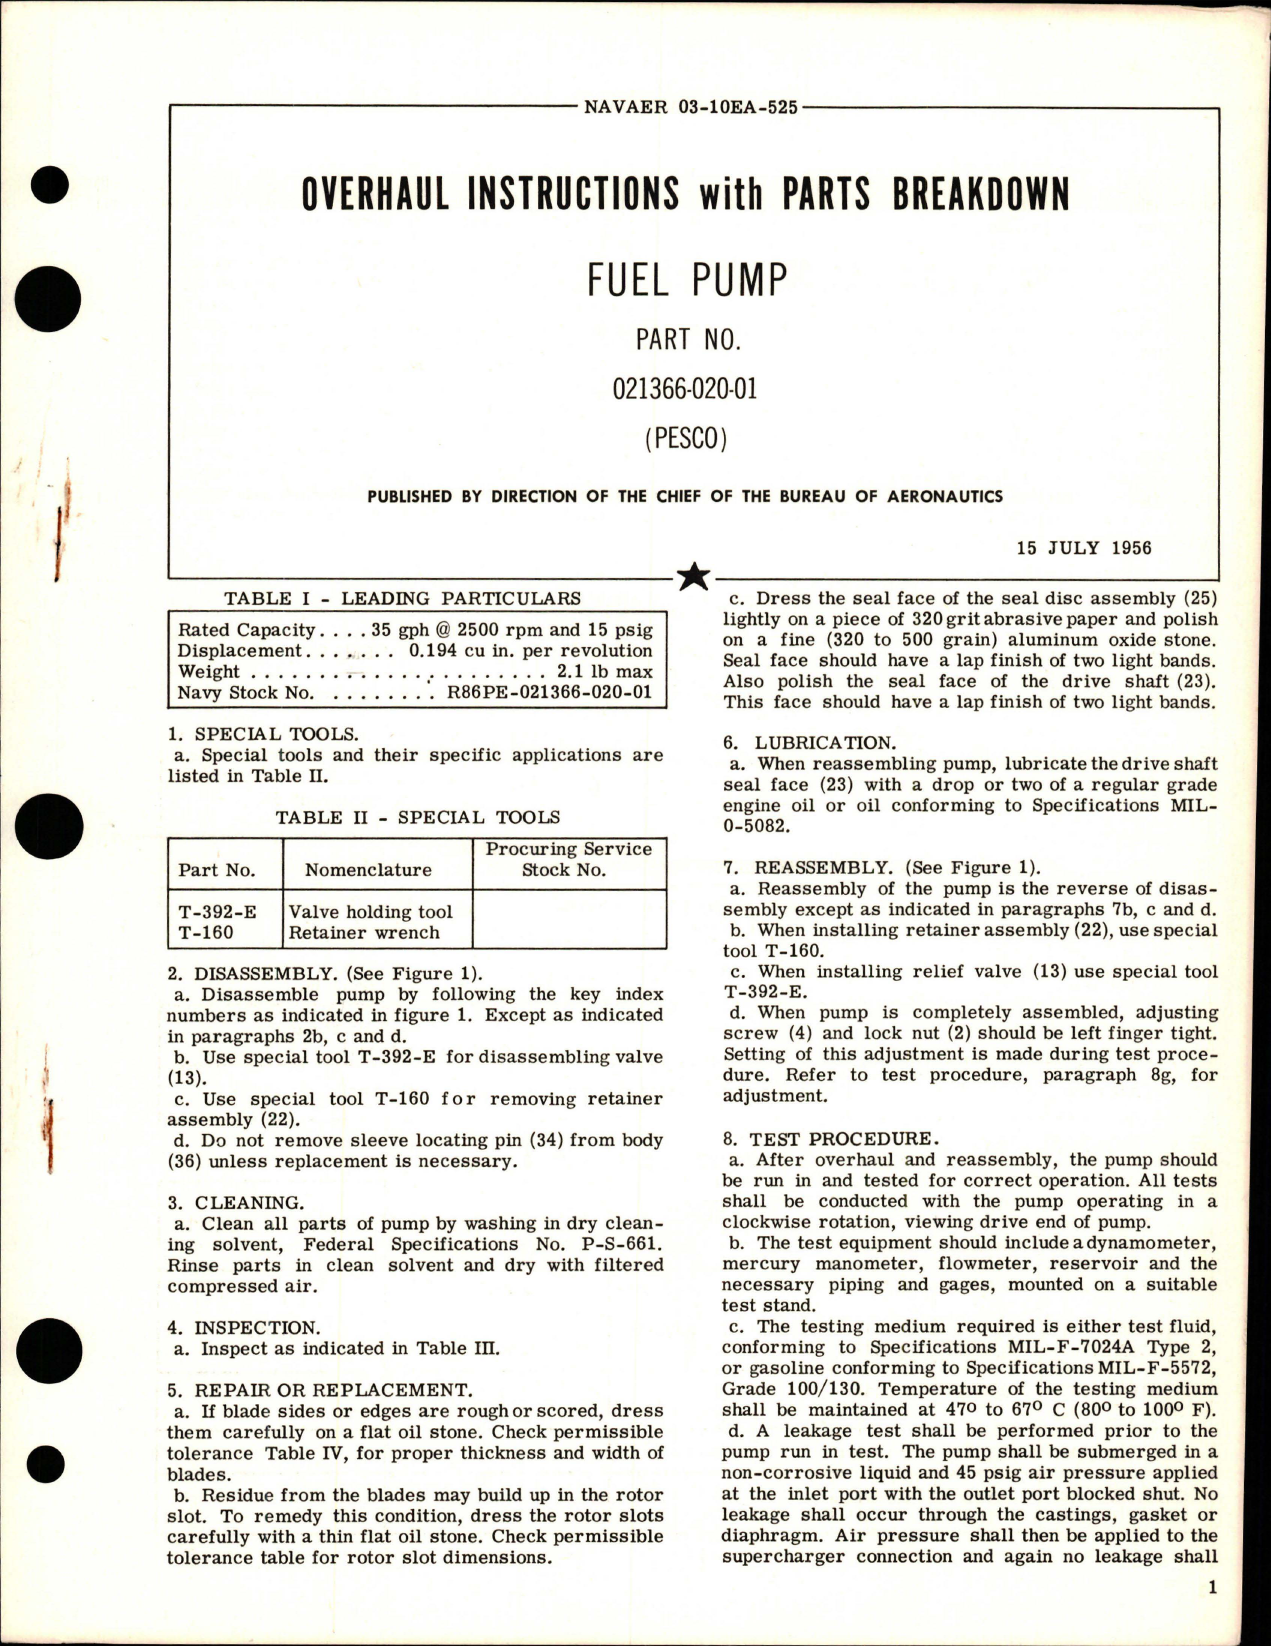 Sample page 1 from AirCorps Library document: Overhaul Instructions with Parts Breakdown for Fuel Pump - Part 021366-020-01